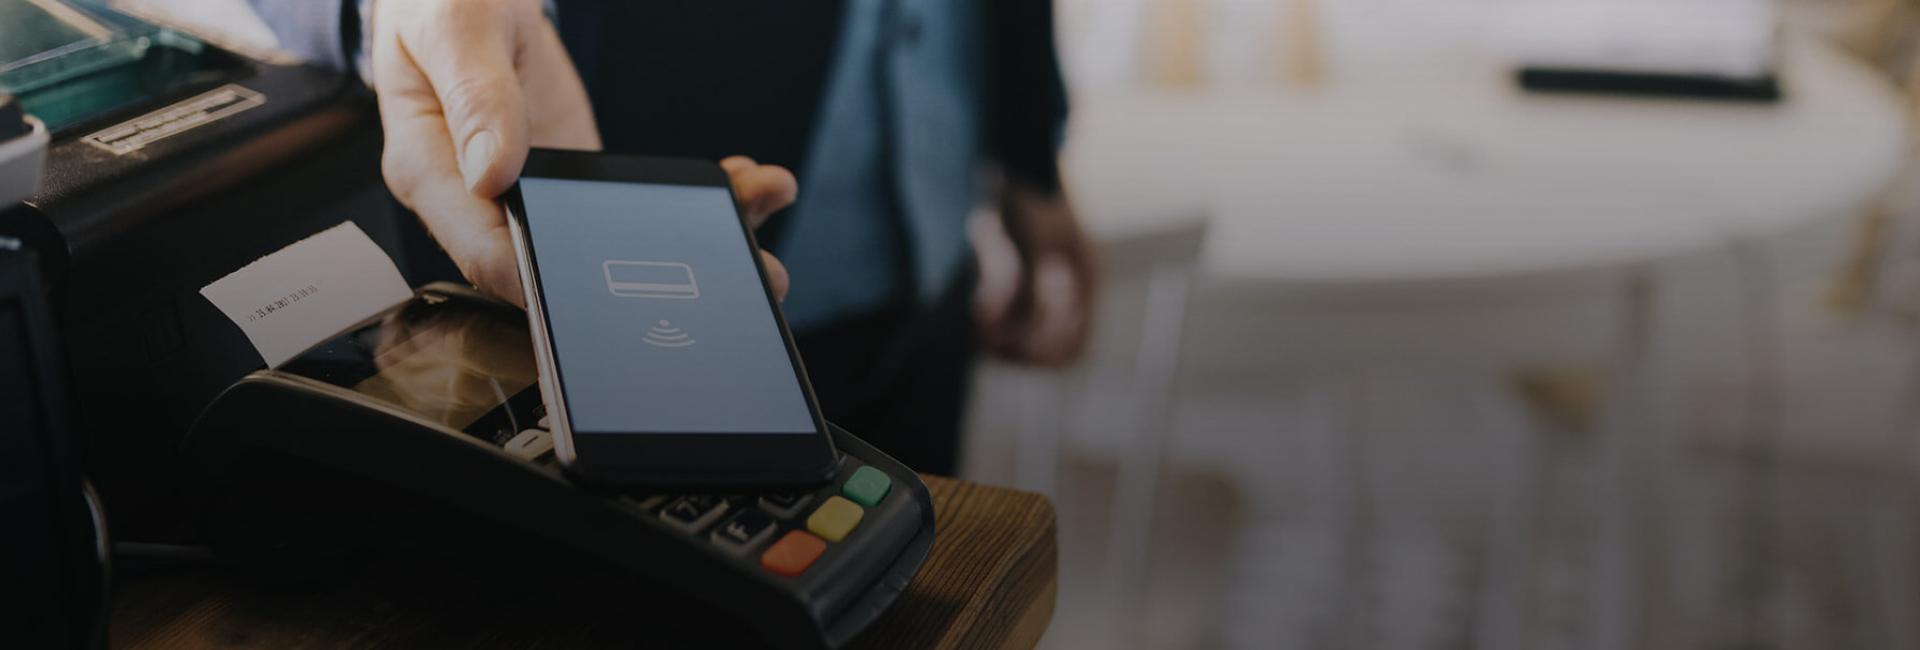 your-guide-to-understanding-nfc-payments